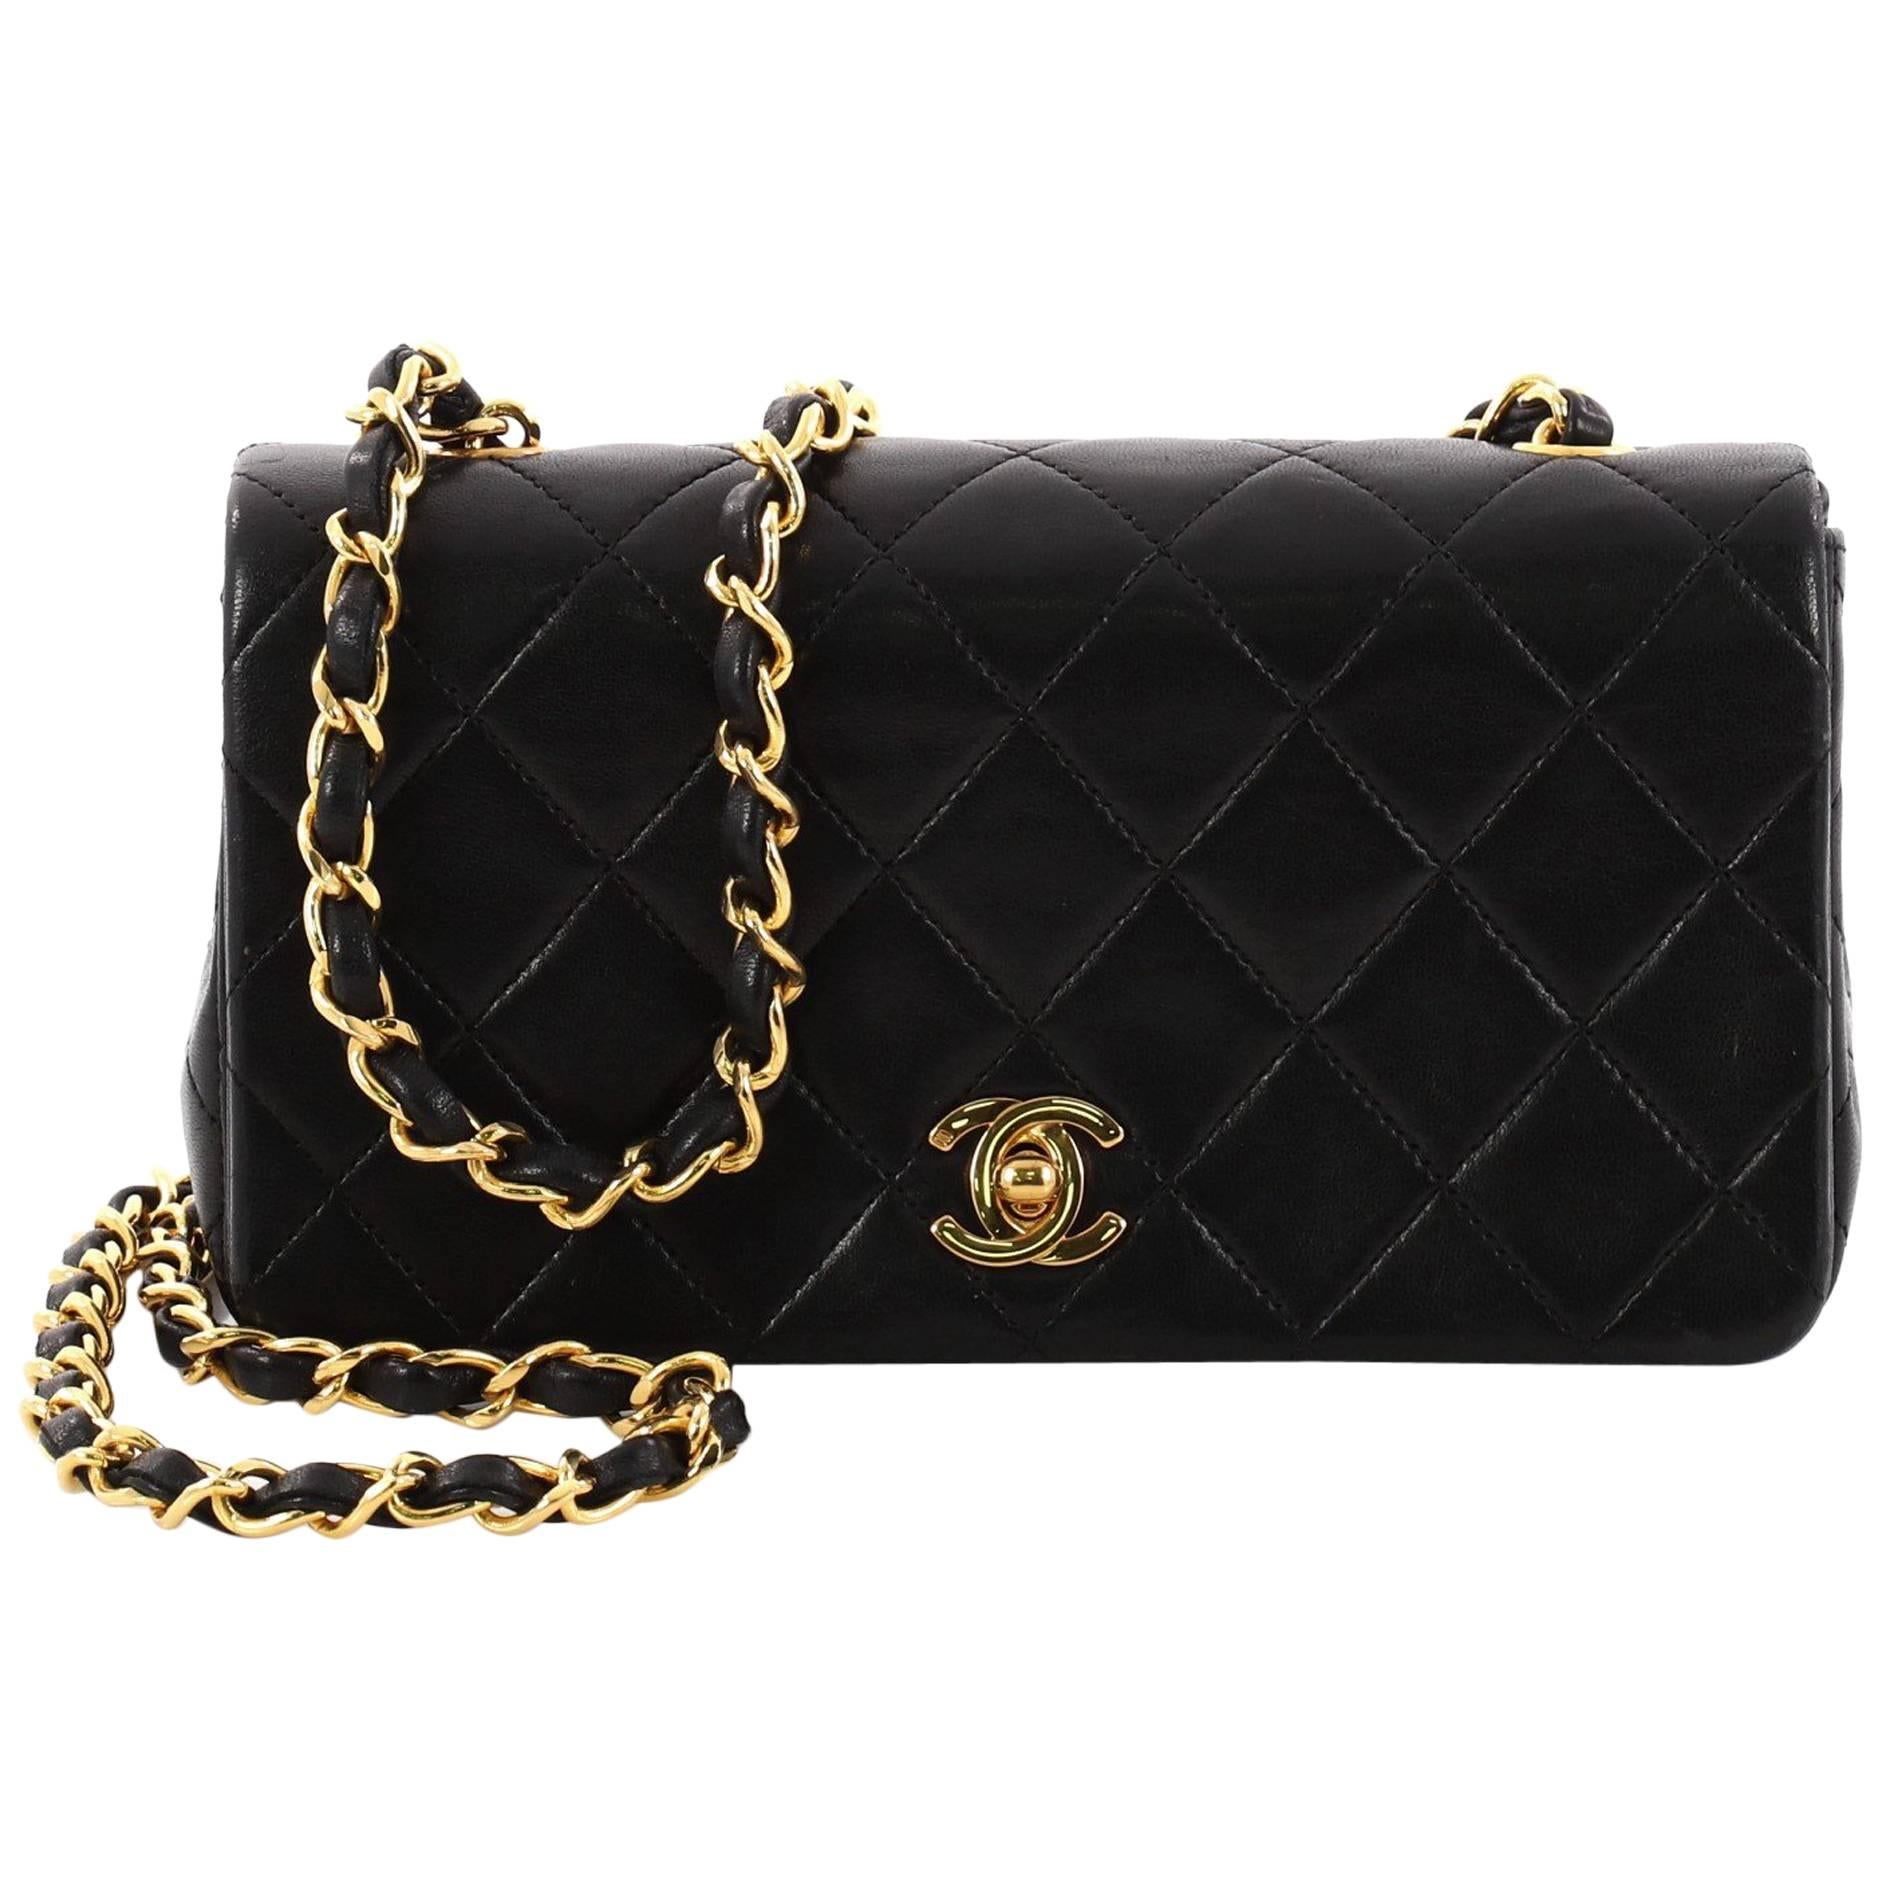 Chanel Vintage 3 Way Full Flap Bag Quilted Lambskin Mini 